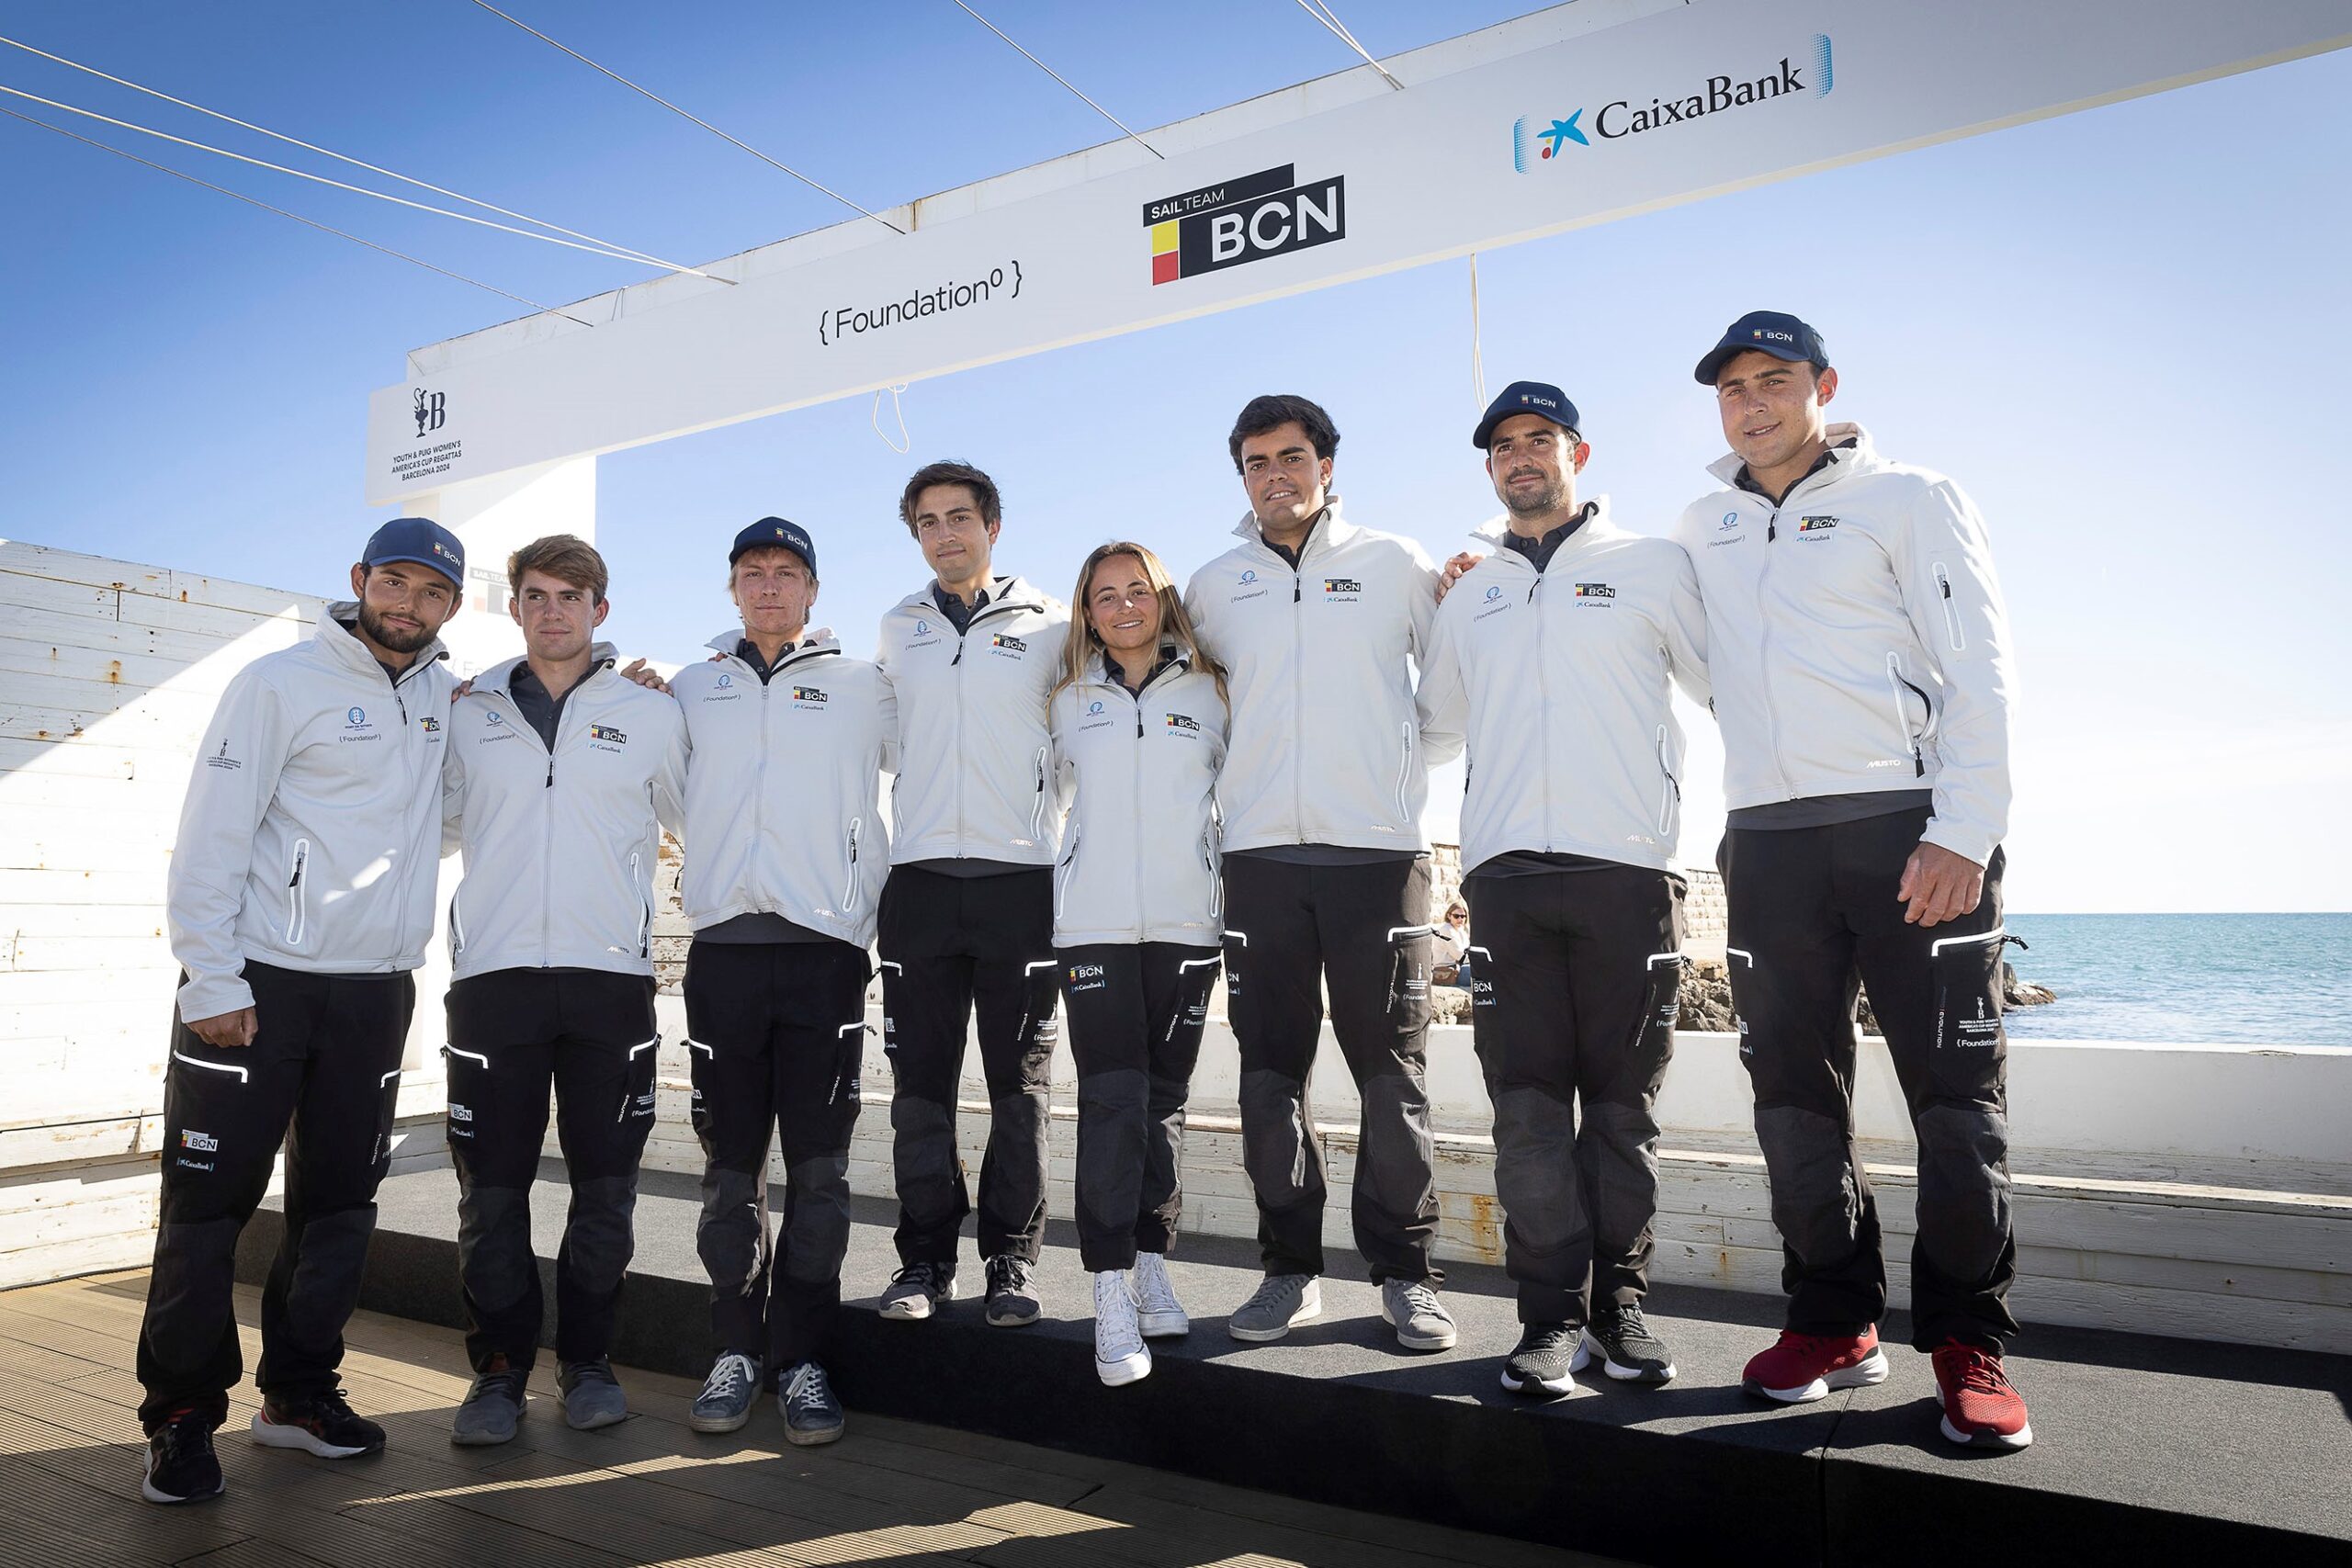 Sail Team BCN presents it’s crew that will compete in the Youth America’s Cup